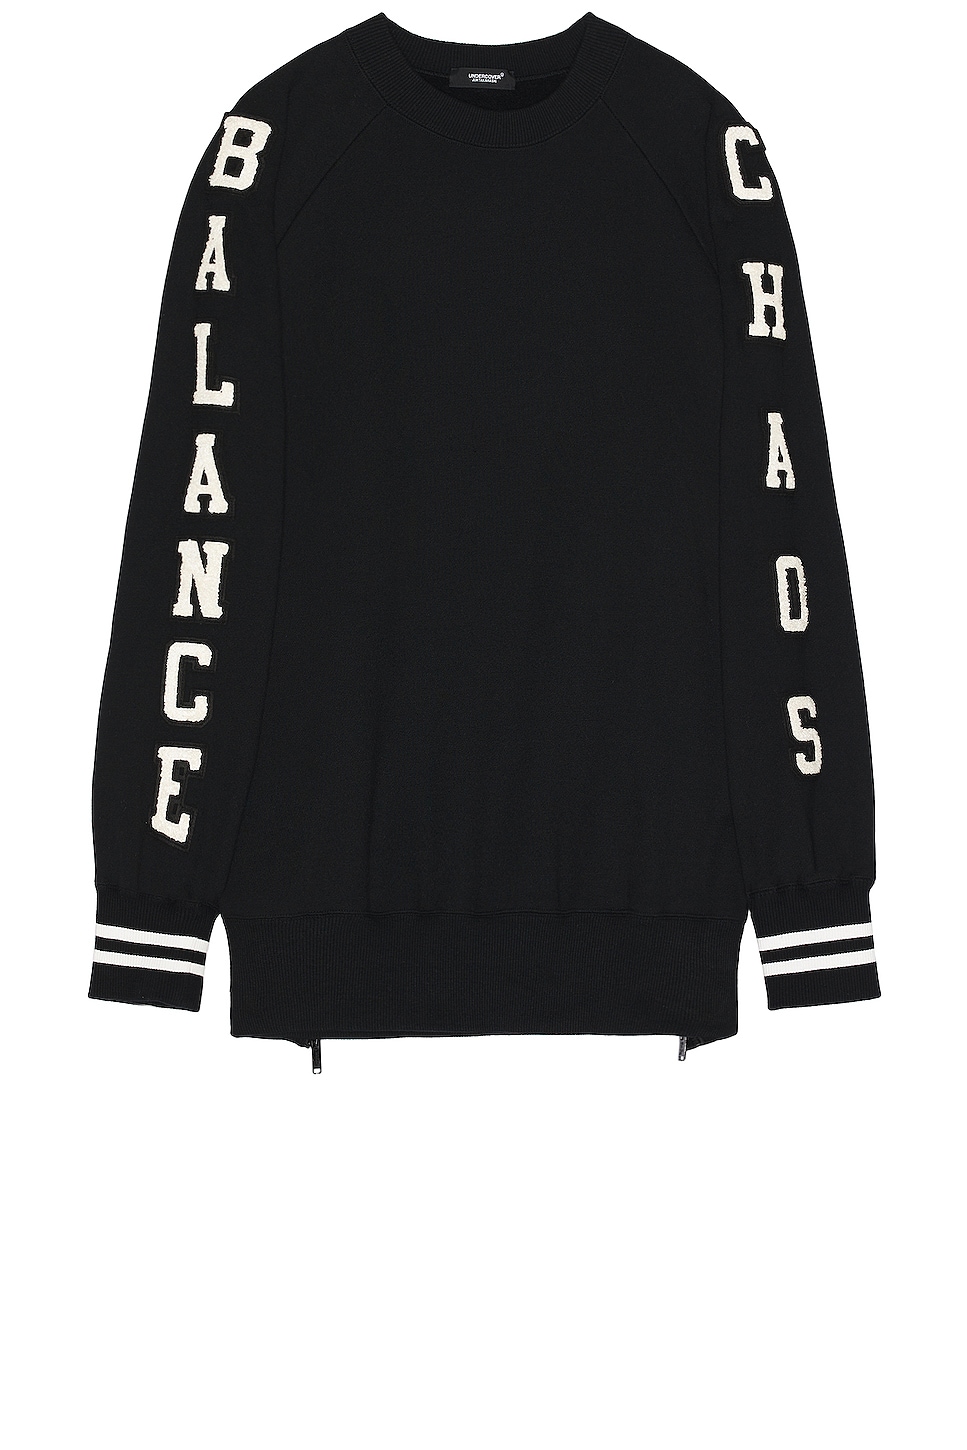 Image 1 of Undercover Balance Chaos Sweater in Black